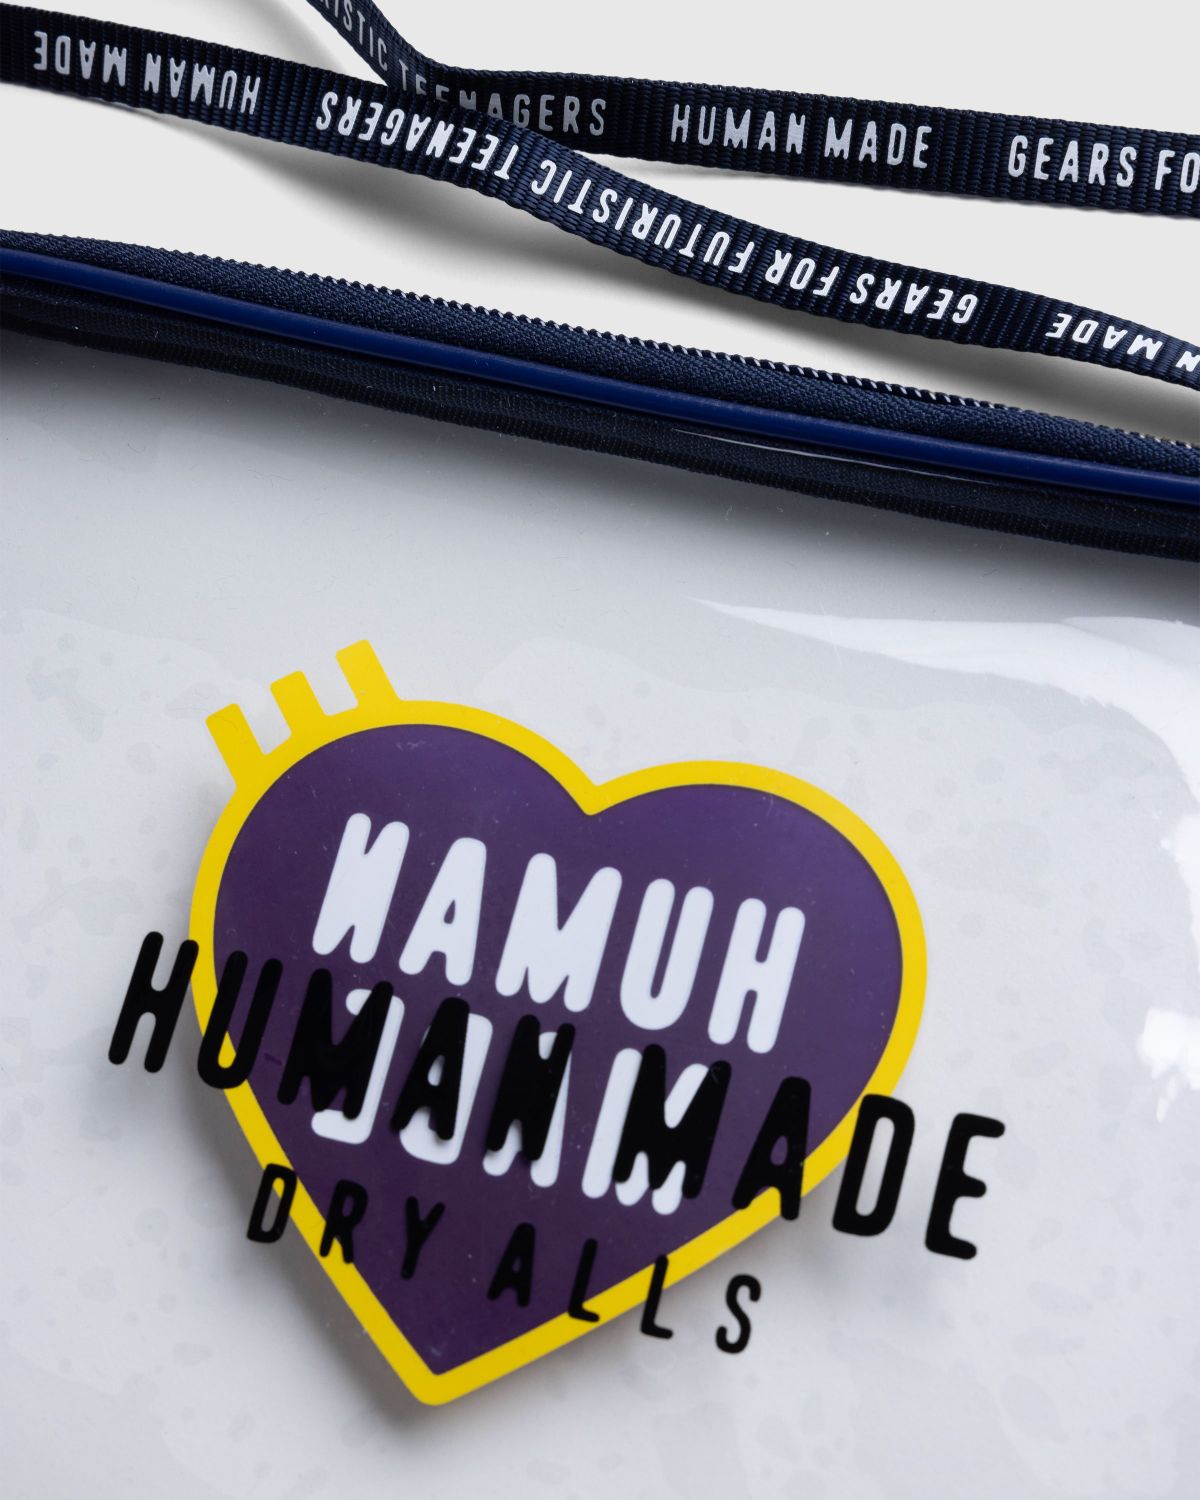 Human Made – PVC Pouch Large Navy